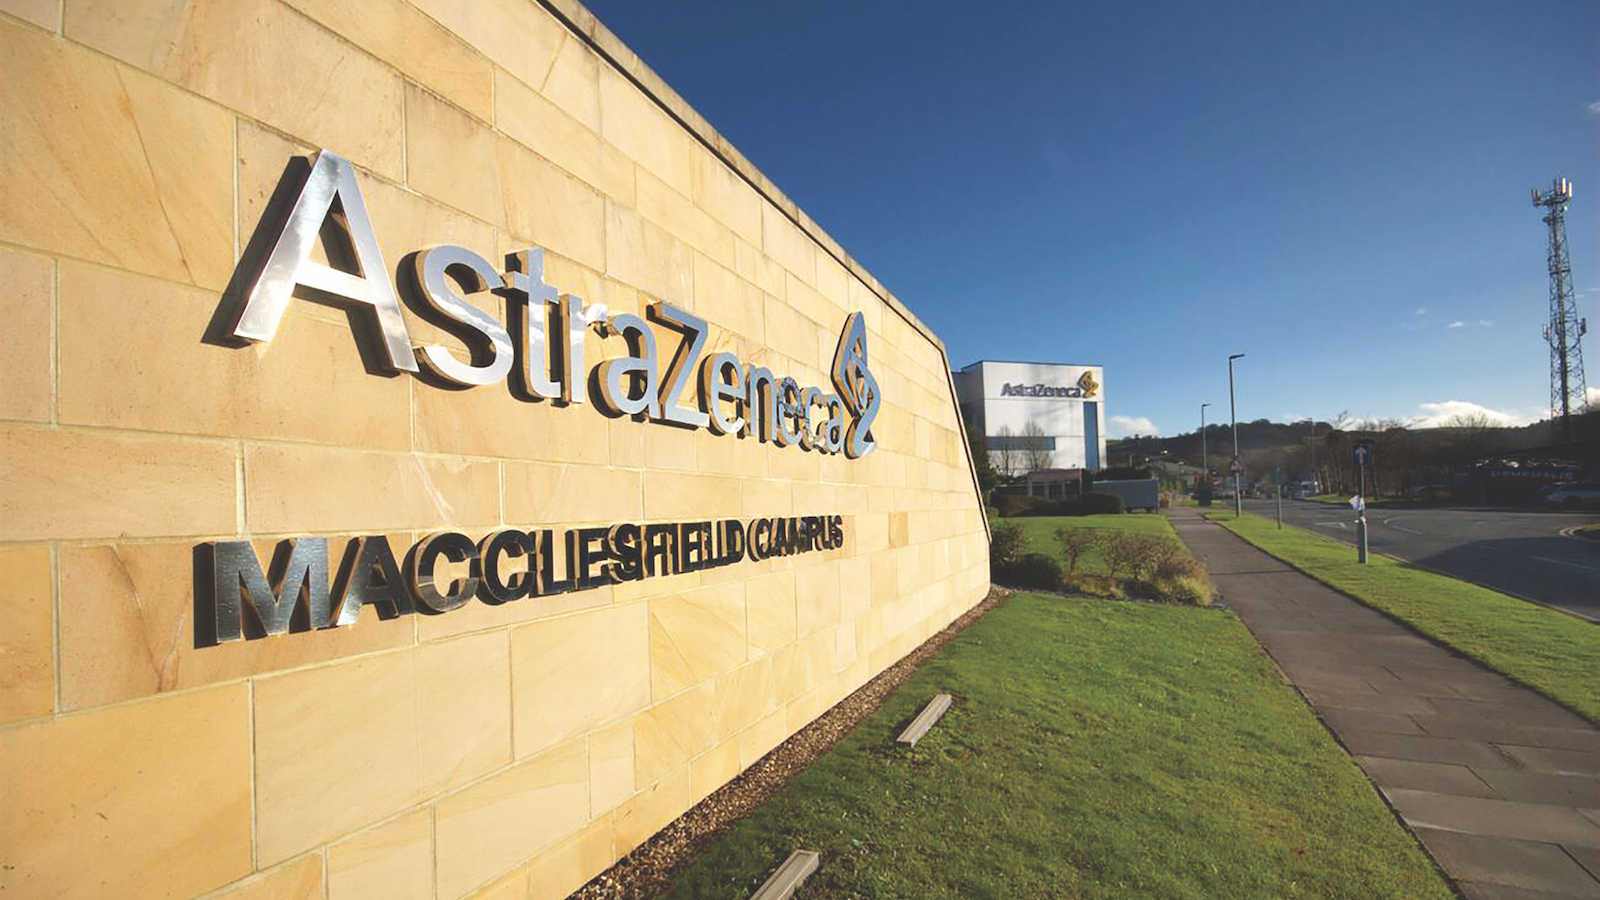 AstraZeneca’s campus at Macclesfield has 4,000 workers. Image: Alamy